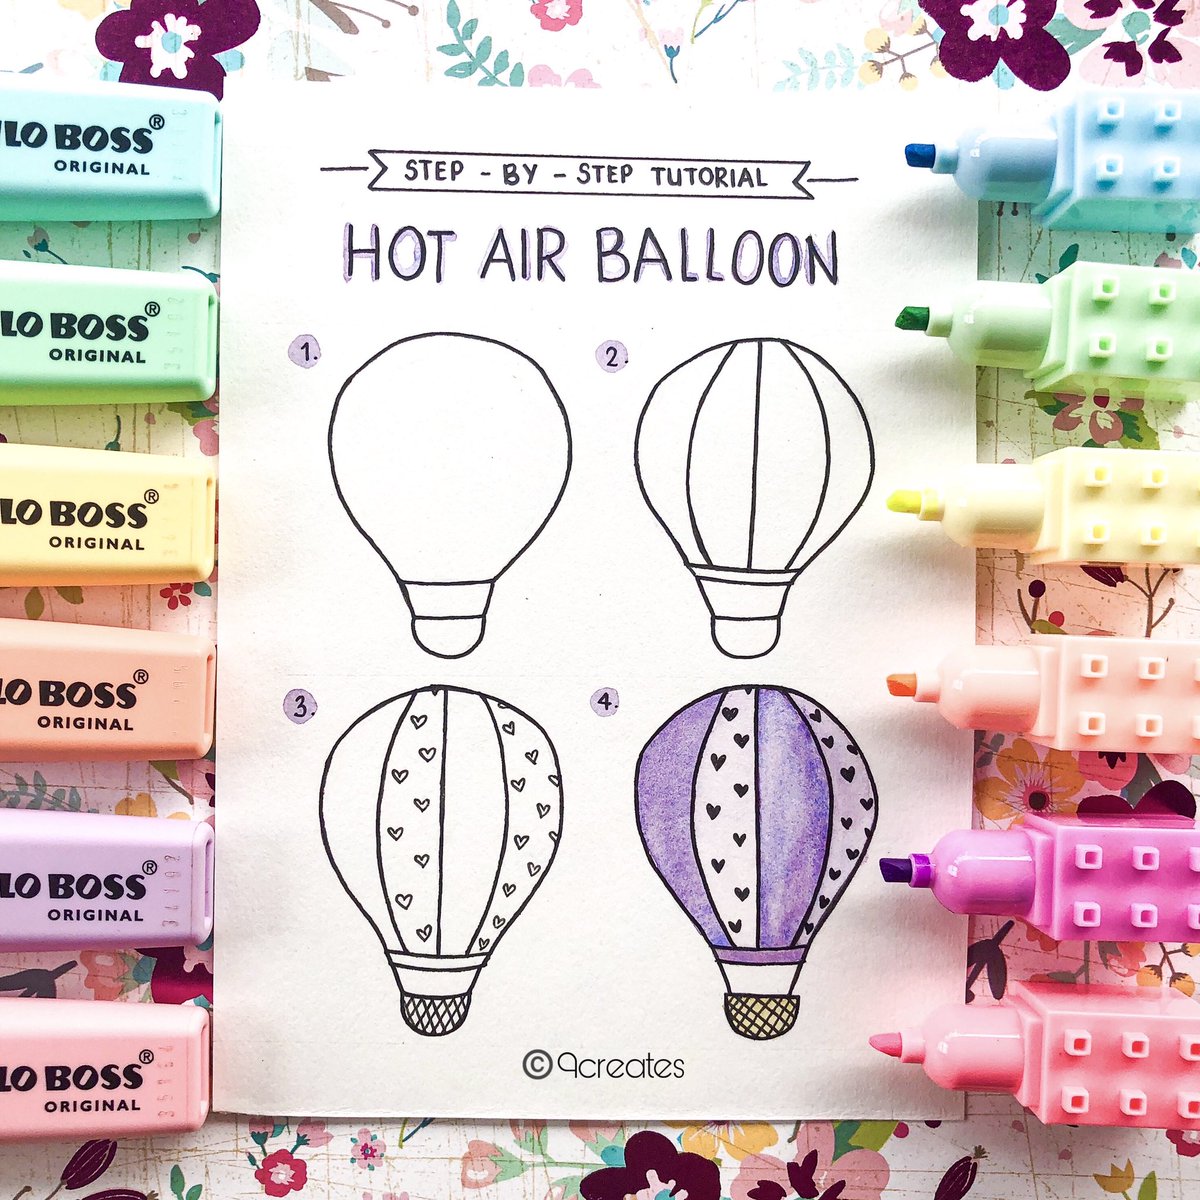 Here’s an easy tutorial for you to learn how to draw a hot air balloon! 🌈💞
.
.
.
#bulletjournal #doodlecommunity #doodle #hotairballoondoodle #doodleleaves #hotairballoon #bulletjournalideas #doodleideas #doodleinspiration